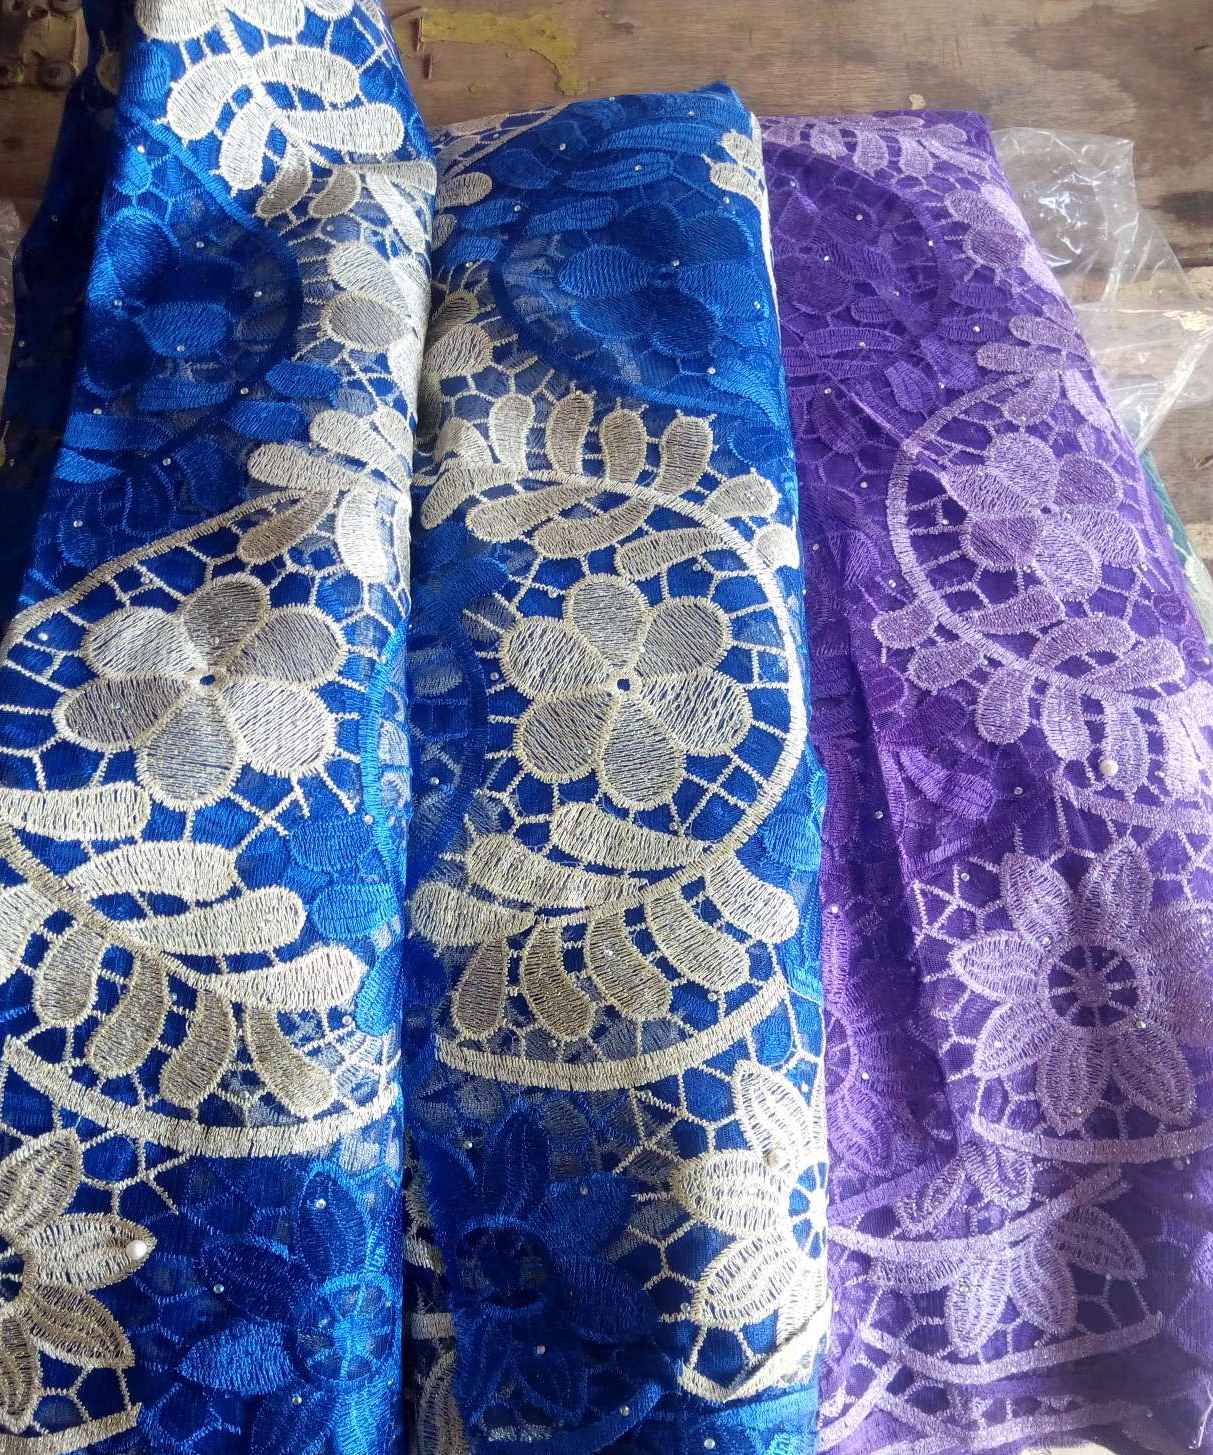 How Much is Lace Material in Nigeria